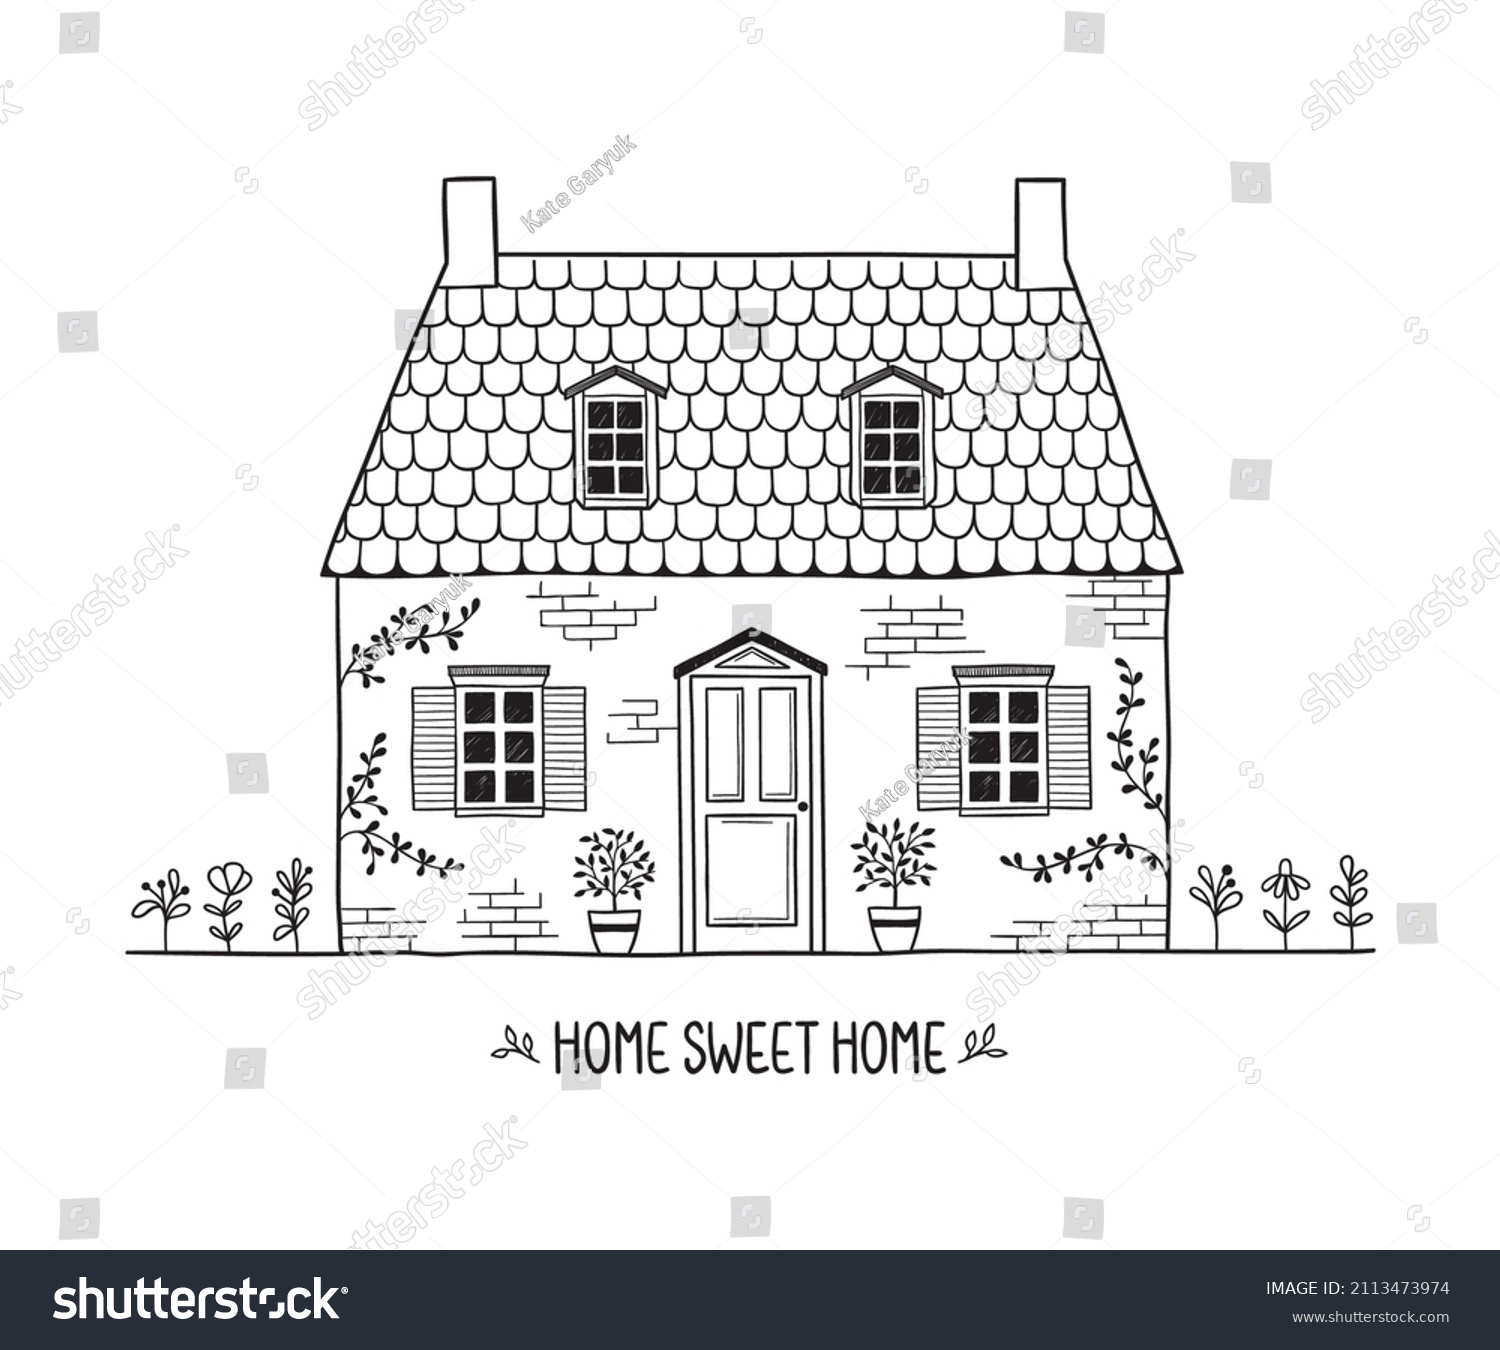 SVG of Cute hand drawn house with flowers and plants. Home Sweet Home hand written text. Lovely cottage in countryside svg